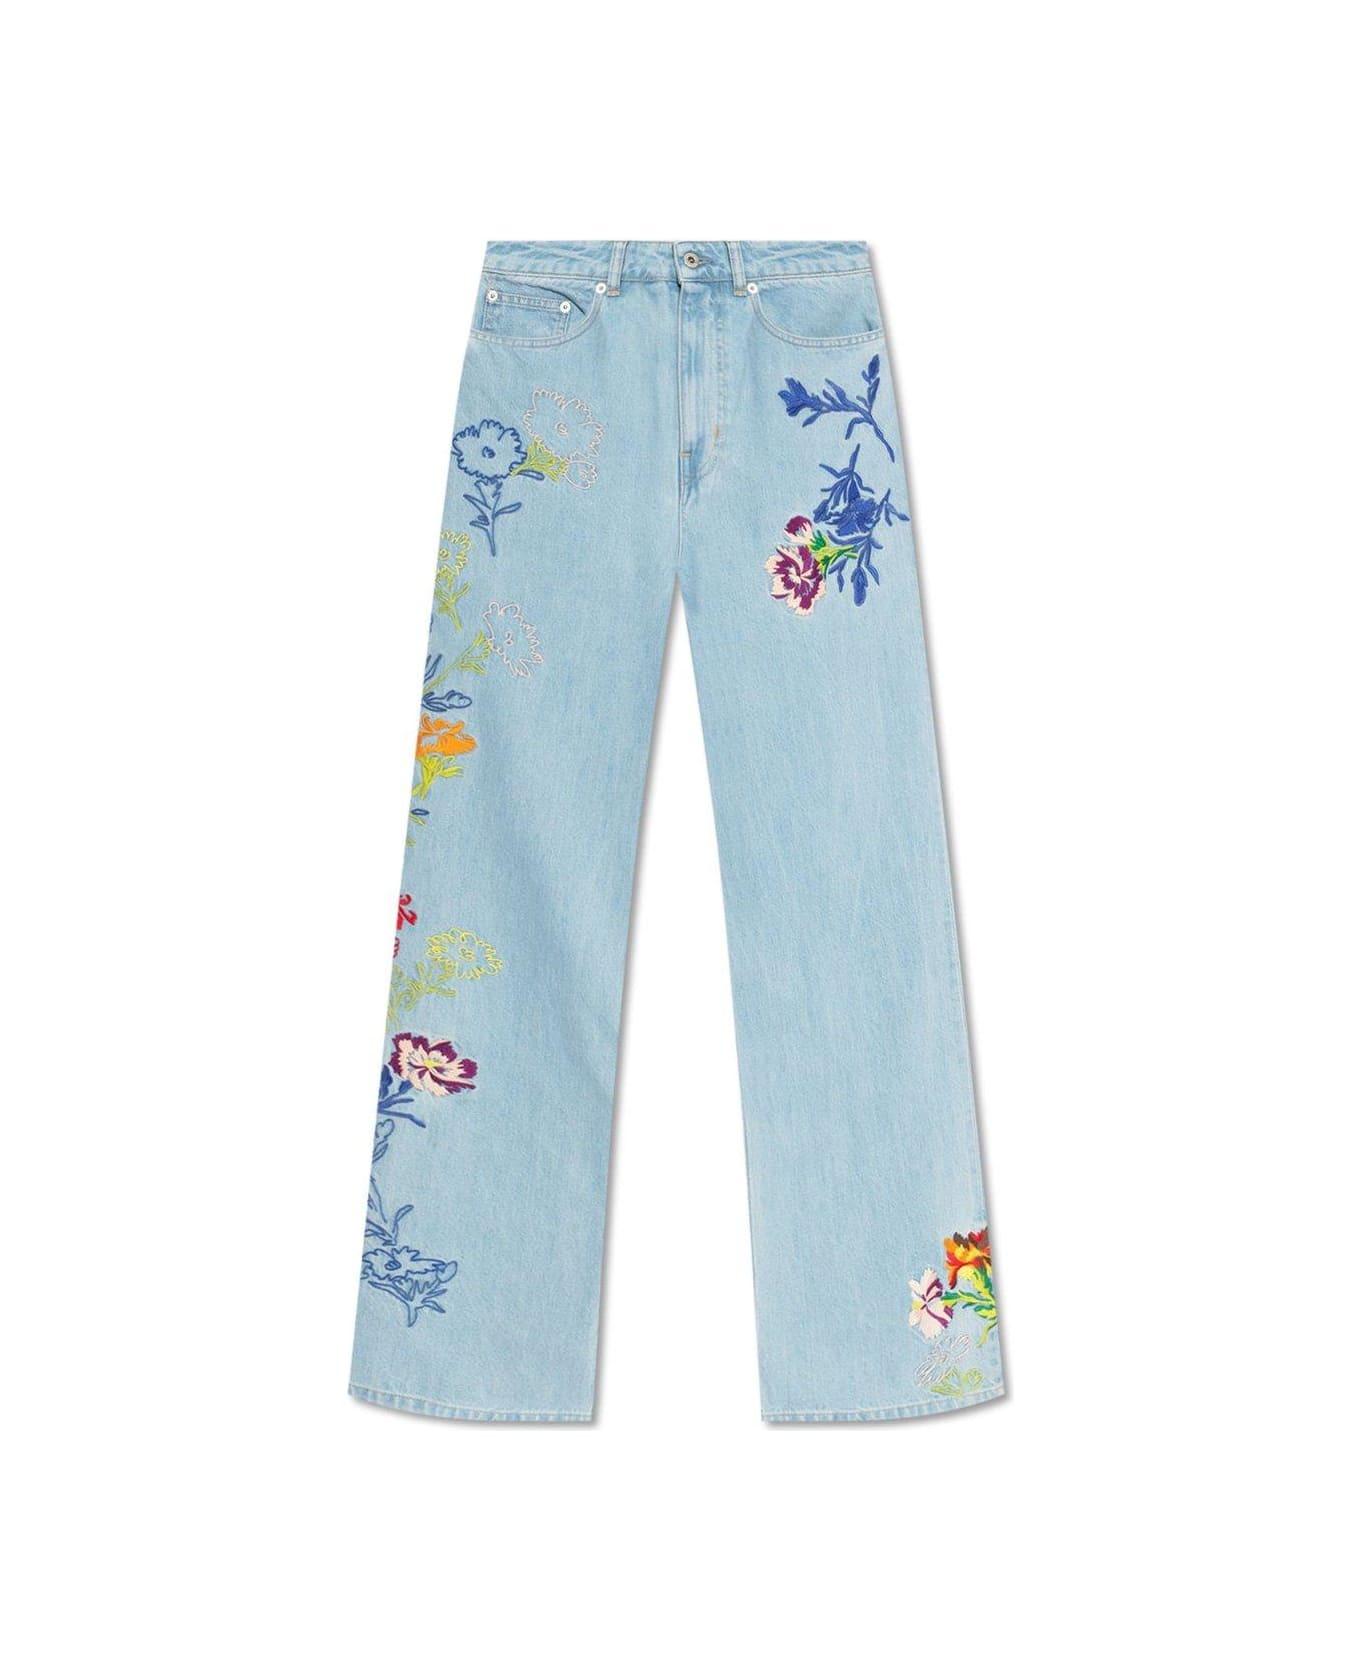 Kenzo Sumire Drawn Flowers High Waist Jeans - STONE WASHED BLUE